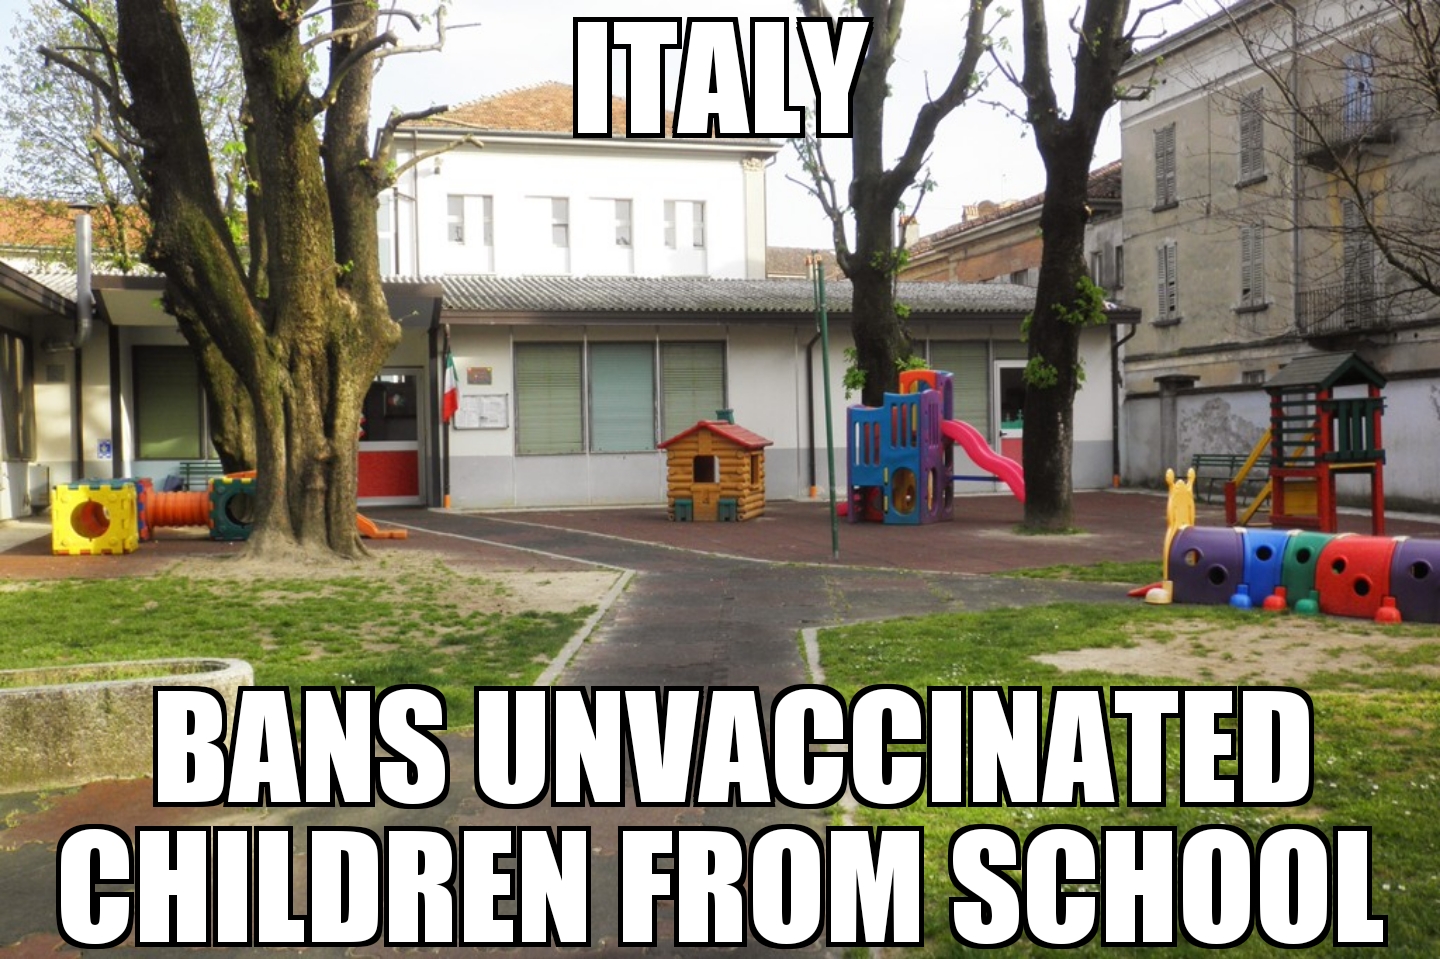 Italy bans unvaccinated kids from school